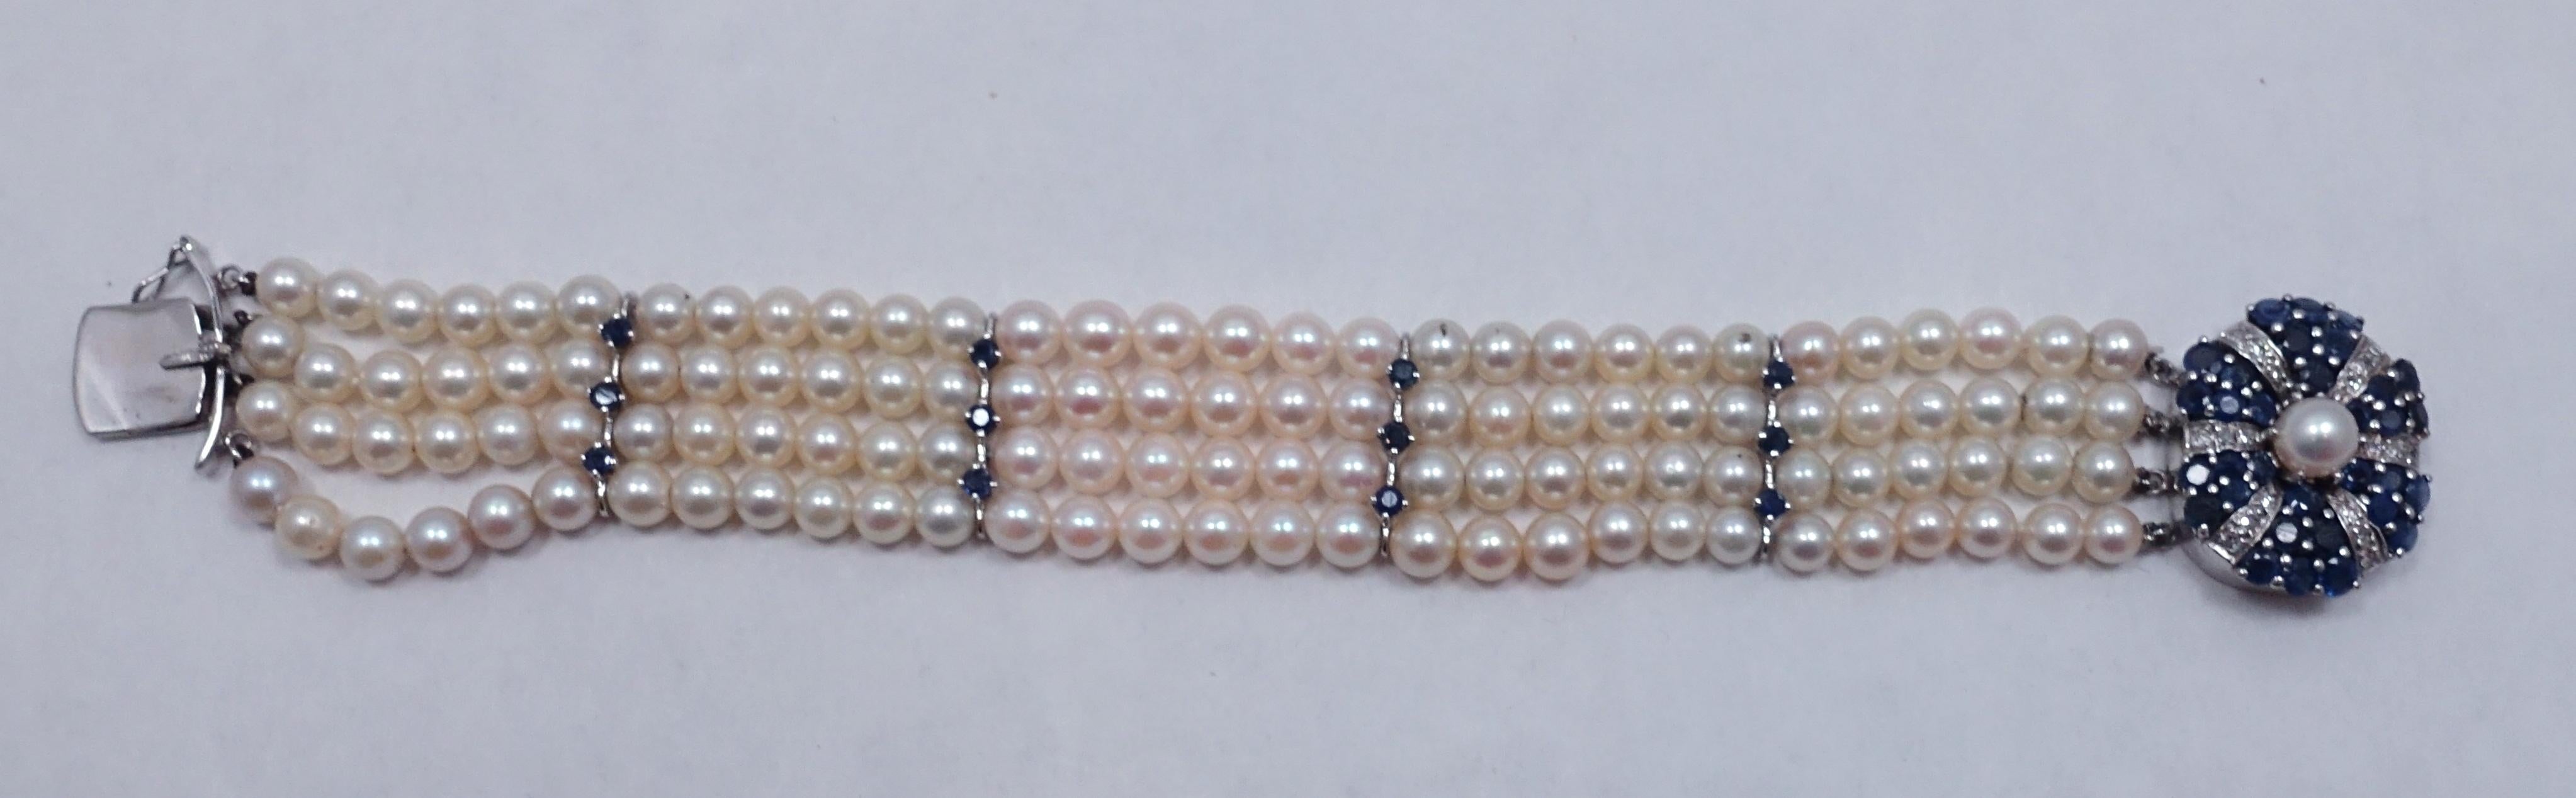 Vintage 14kt Gold Diamonds, Sapphires & Pearls Bracelet In Excellent Condition For Sale In New York, NY